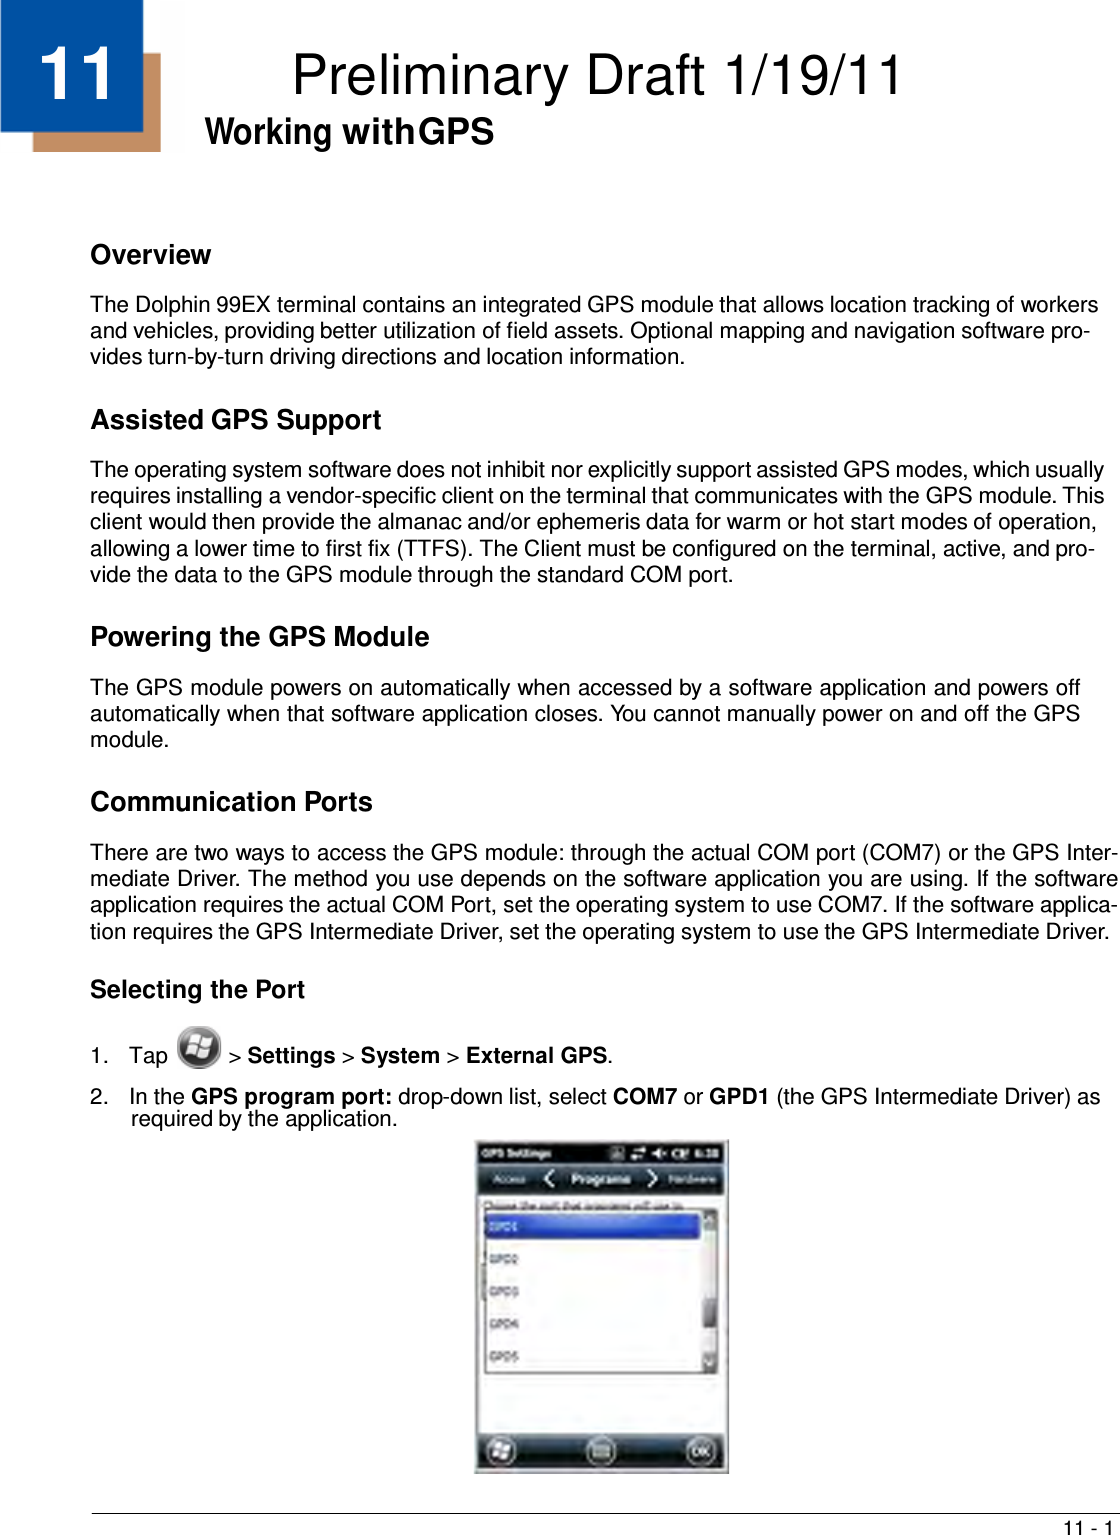 11 - 1    11  Preliminary Draft 1/19/11 Working with GPS     Overview  The Dolphin 99EX terminal contains an integrated GPS module that allows location tracking of workers and vehicles, providing better utilization of field assets. Optional mapping and navigation software pro- vides turn-by-turn driving directions and location information.   Assisted GPS Support  The operating system software does not inhibit nor explicitly support assisted GPS modes, which usually requires installing a vendor-specific client on the terminal that communicates with the GPS module. This client would then provide the almanac and/or ephemeris data for warm or hot start modes of operation, allowing a lower time to first fix (TTFS). The Client must be configured on the terminal, active, and pro- vide the data to the GPS module through the standard COM port.   Powering the GPS Module  The GPS module powers on automatically when accessed by a software application and powers off automatically when that software application closes. You cannot manually power on and off the GPS module.   Communication Ports  There are two ways to access the GPS module: through the actual COM port (COM7) or the GPS Inter- mediate Driver. The method you use depends on the software application you are using. If the software application requires the actual COM Port, set the operating system to use COM7. If the software applica- tion requires the GPS Intermediate Driver, set the operating system to use the GPS Intermediate Driver.  Selecting the Port   1.  Tap  &gt; Settings &gt; System &gt; External GPS.  2.  In the GPS program port: drop-down list, select COM7 or GPD1 (the GPS Intermediate Driver) as required by the application. 